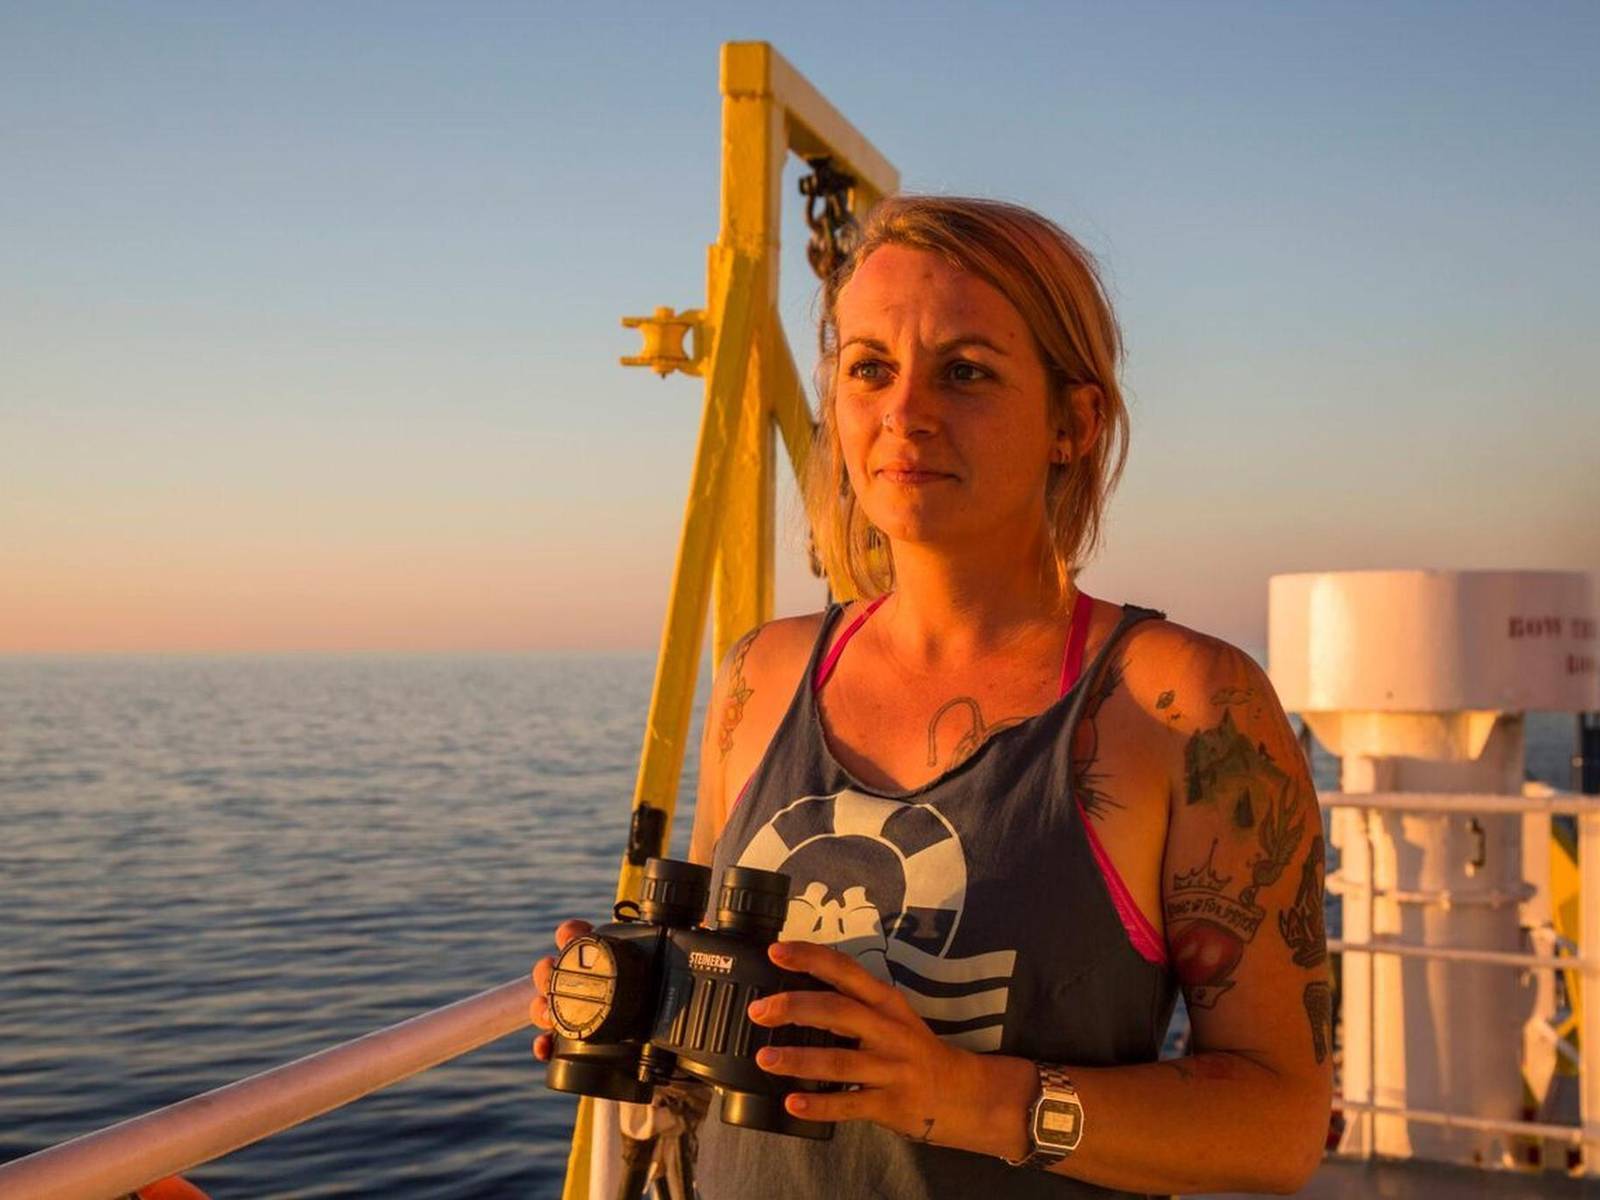 Pia Kemp, Female Boat Captain Facing 20 Years In Jail For Helping Oppressed People